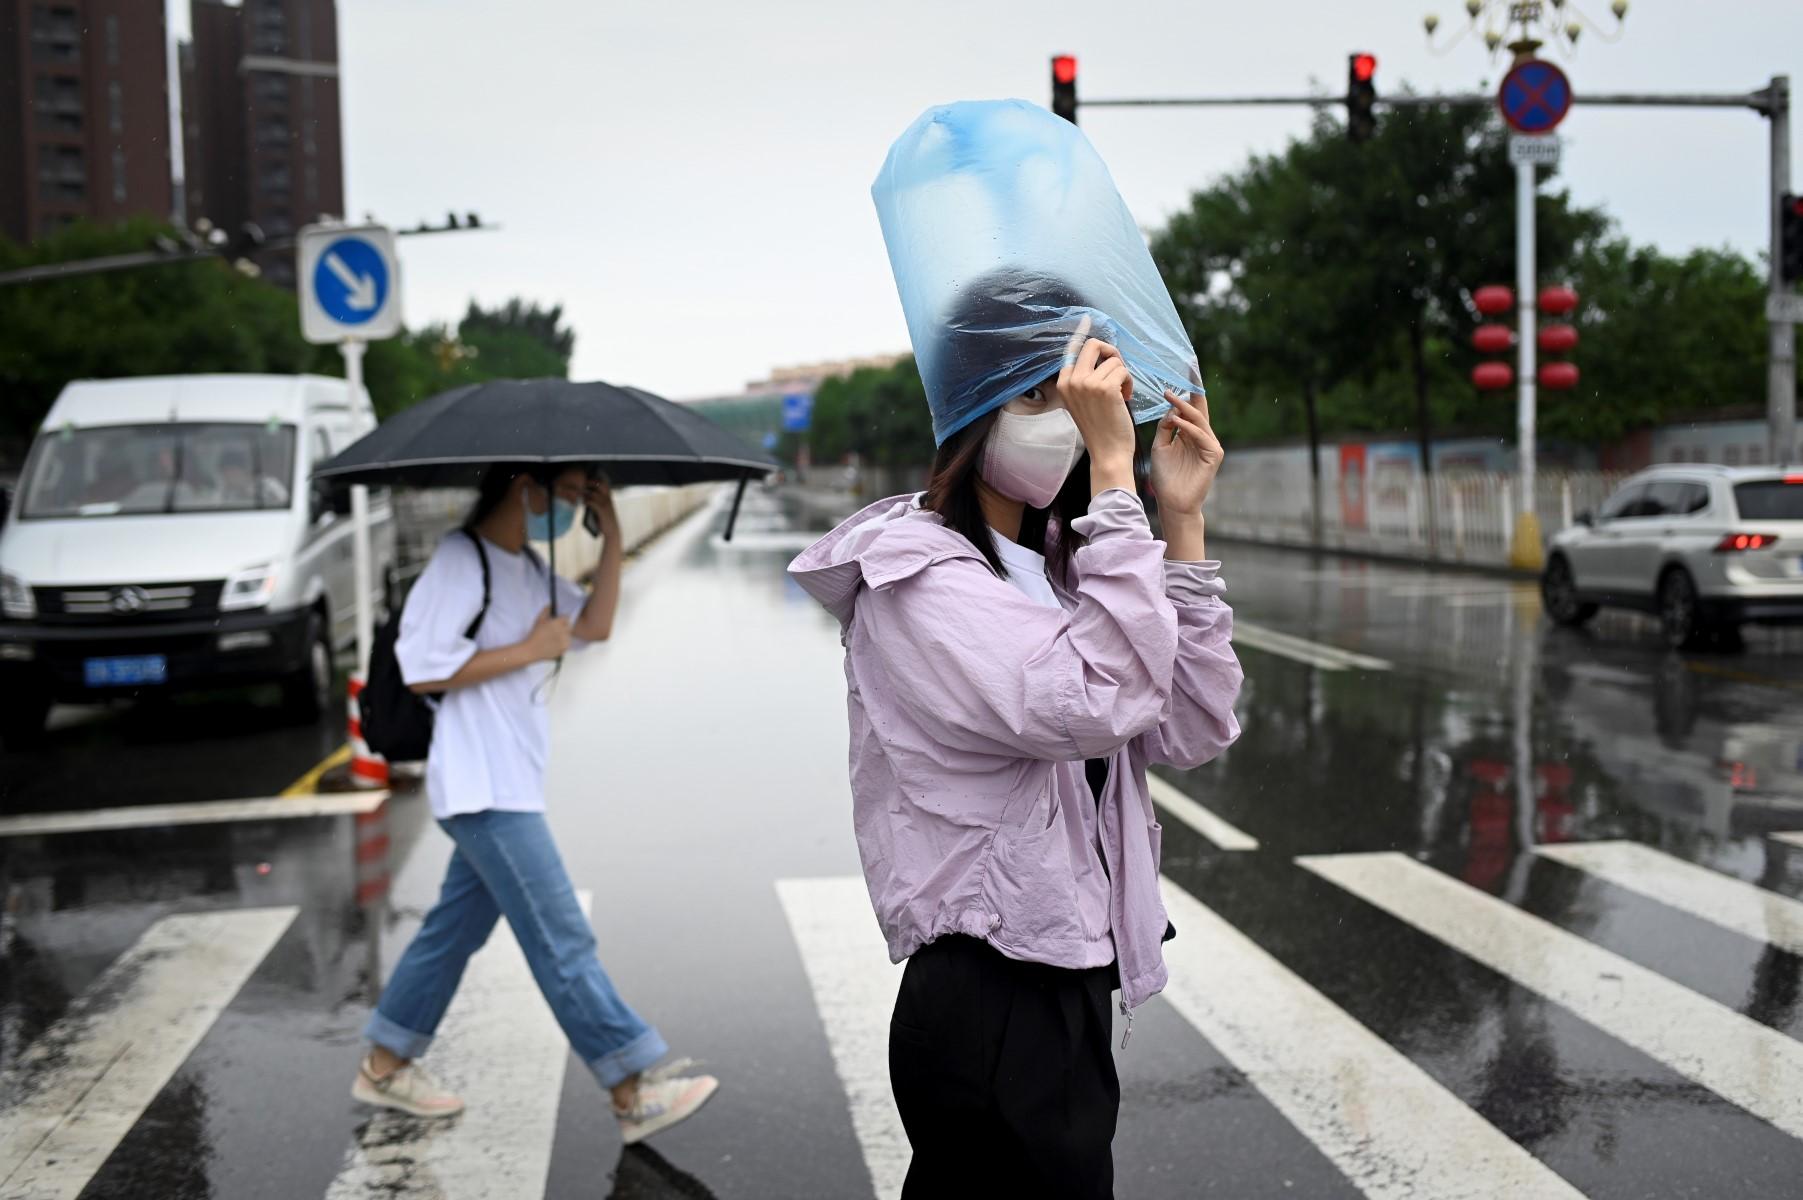 A woman uses a plastic bag to shelter from the rain as she crosses a street in Beijing on June 27. Photo: AFP